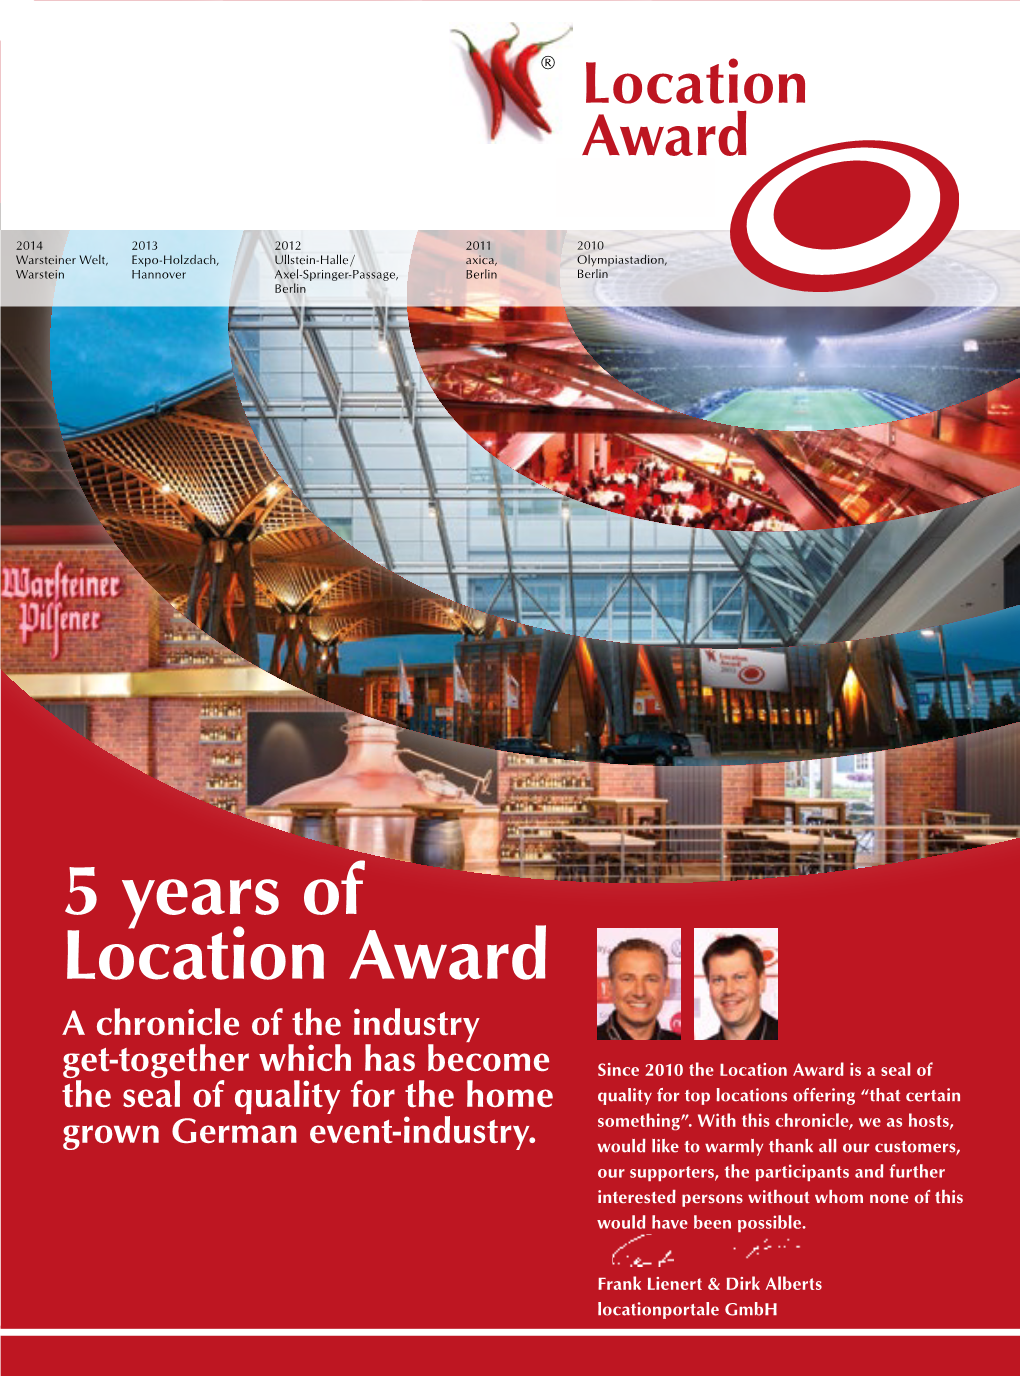 5 Years of Location Award a Chronicle of the Industry